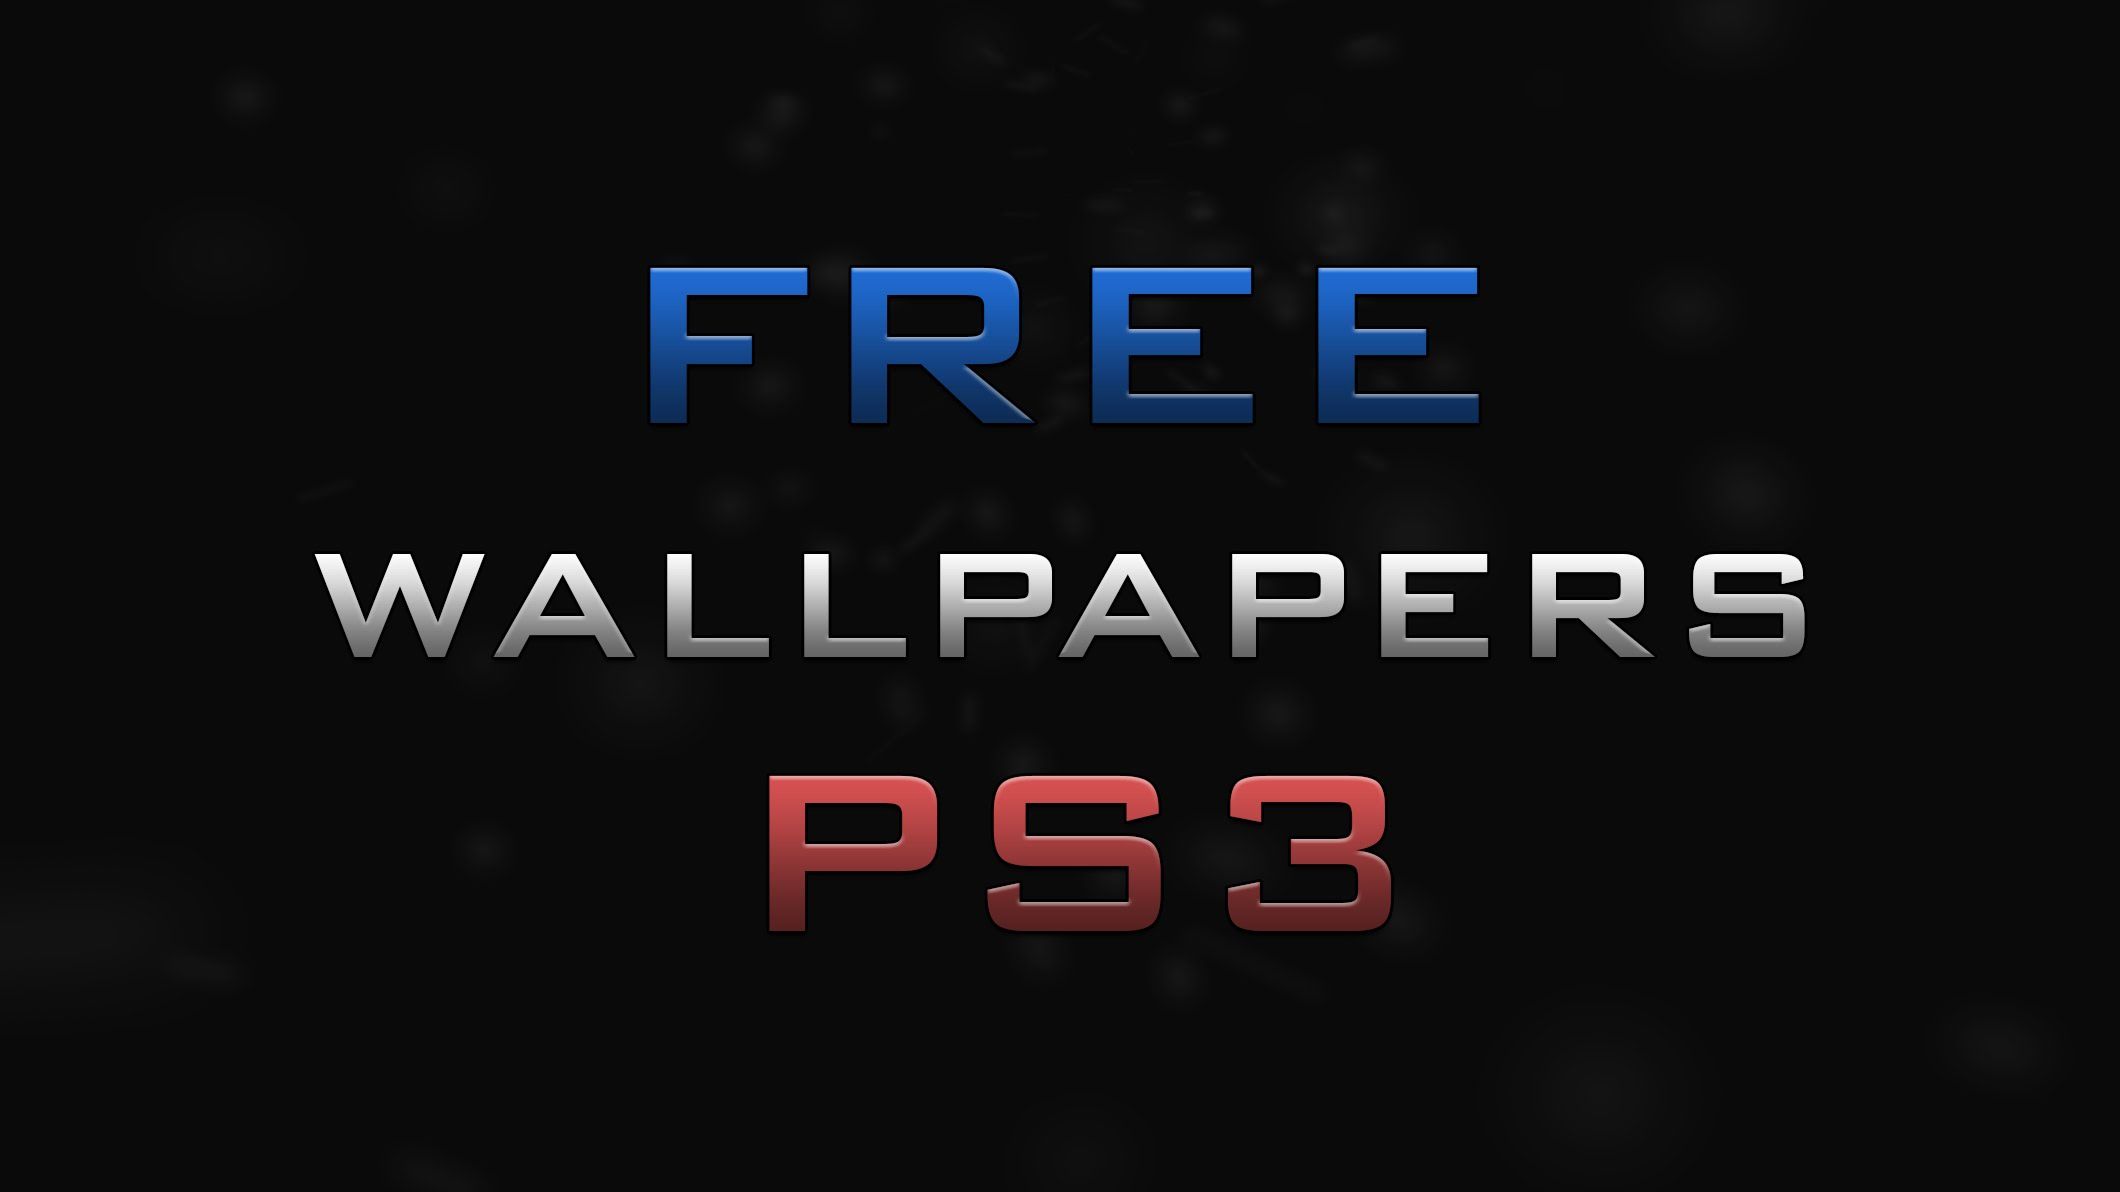 How to get free wallpaper ps3! - YouTube